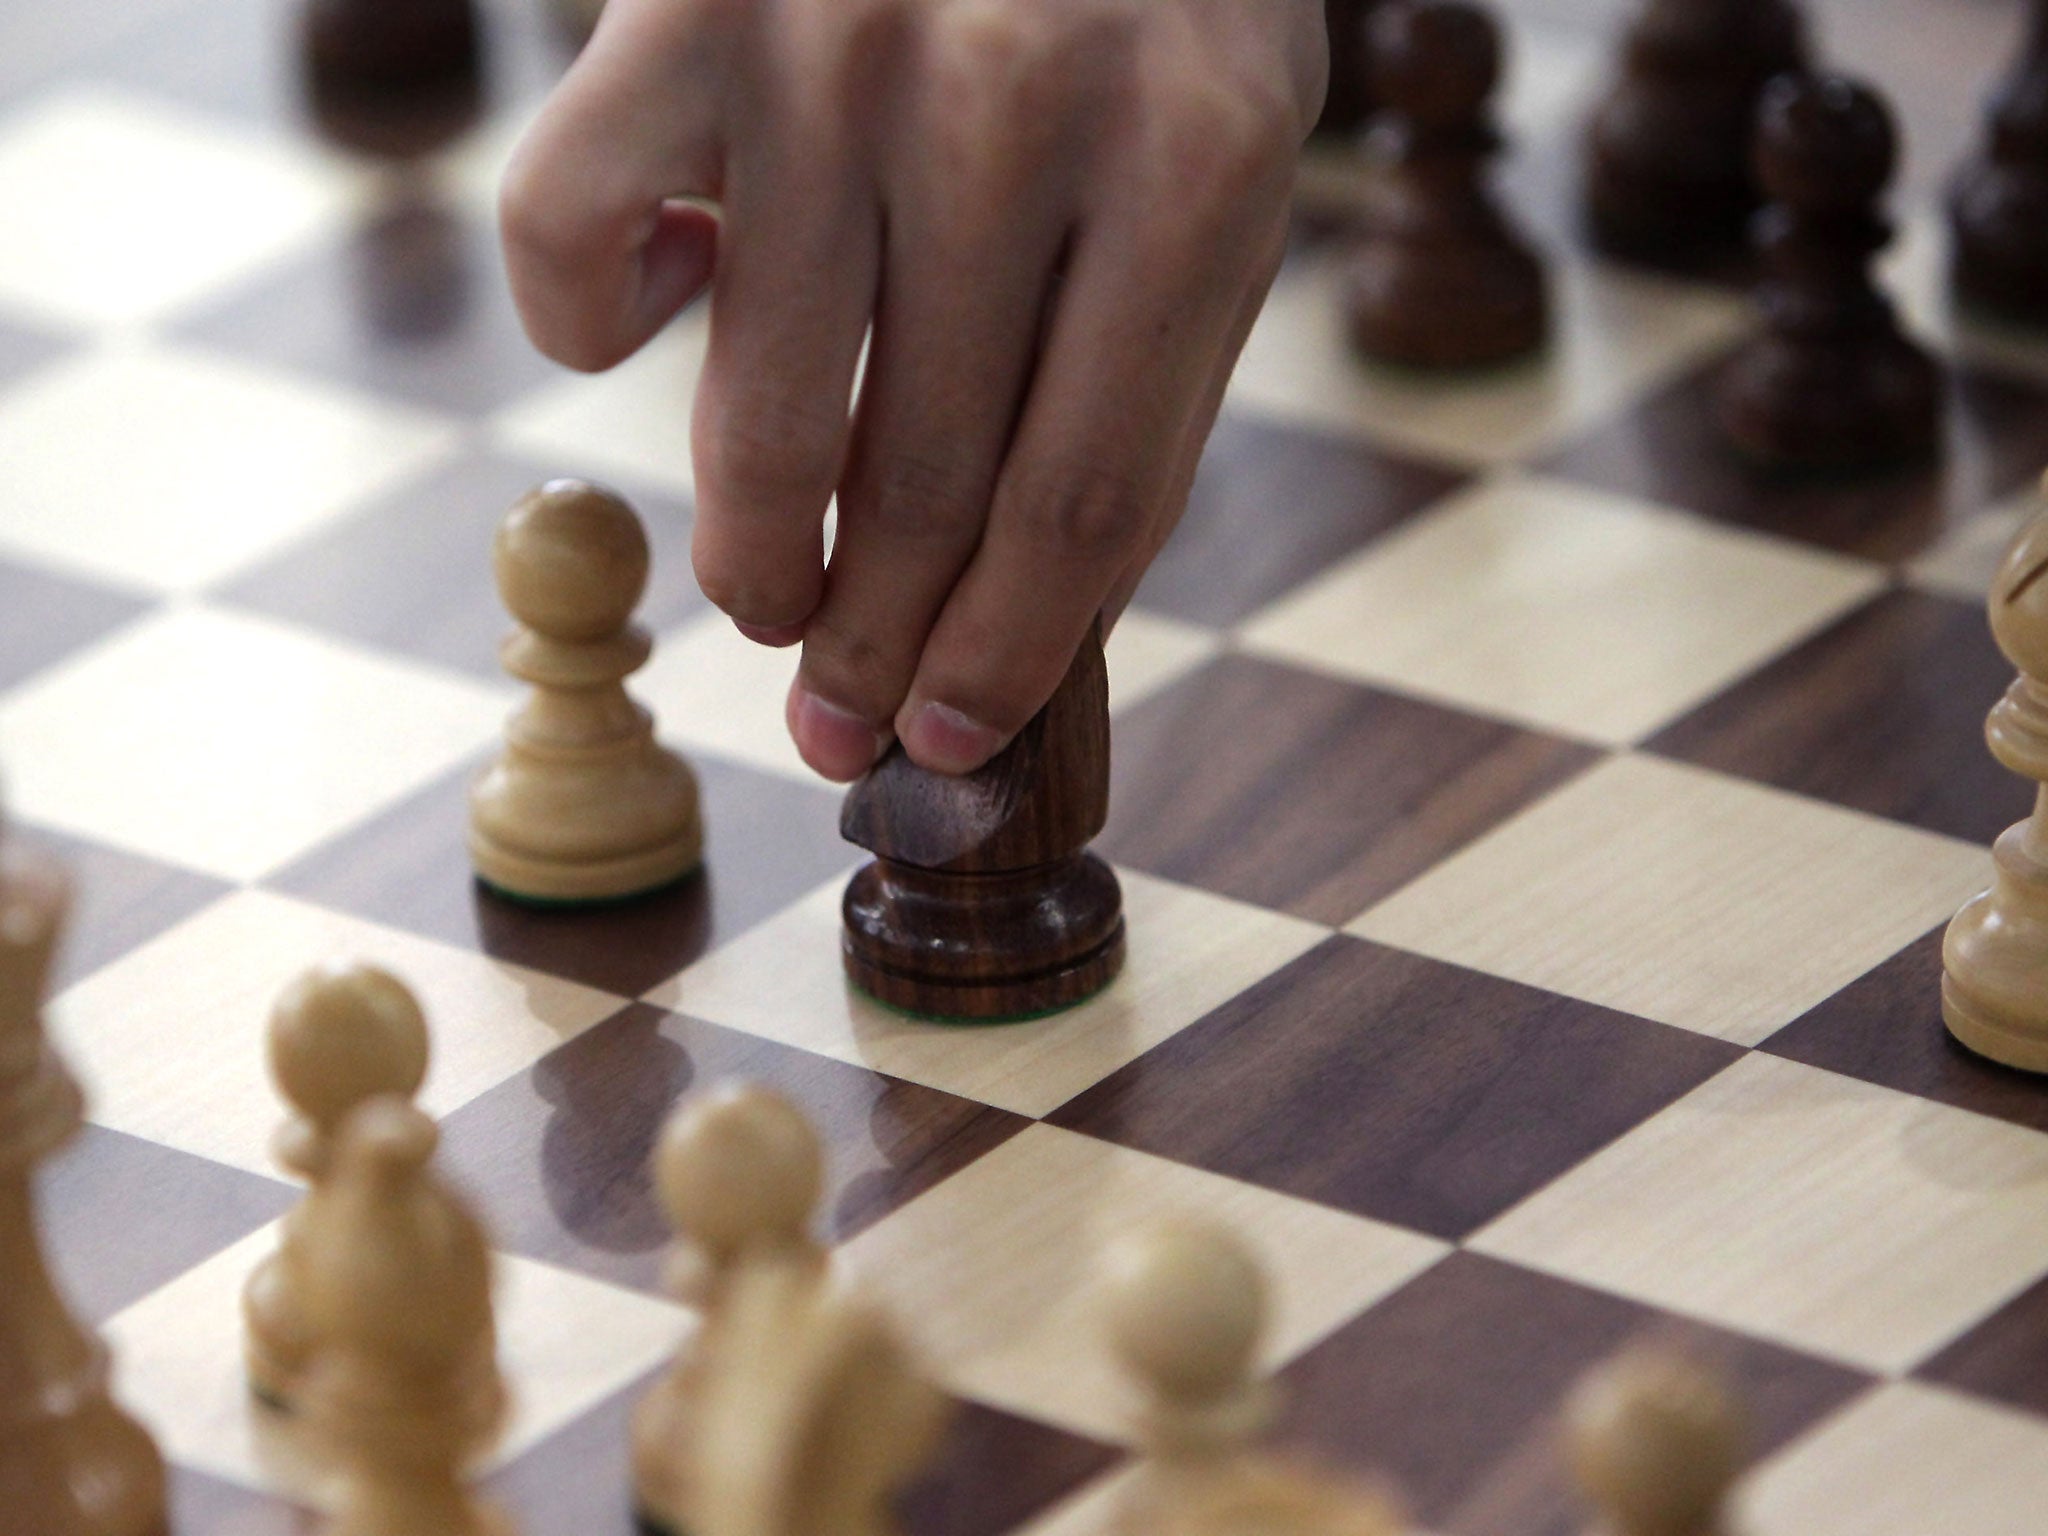 Previous fatwas by clerics in Iran and Iraq have banned chess